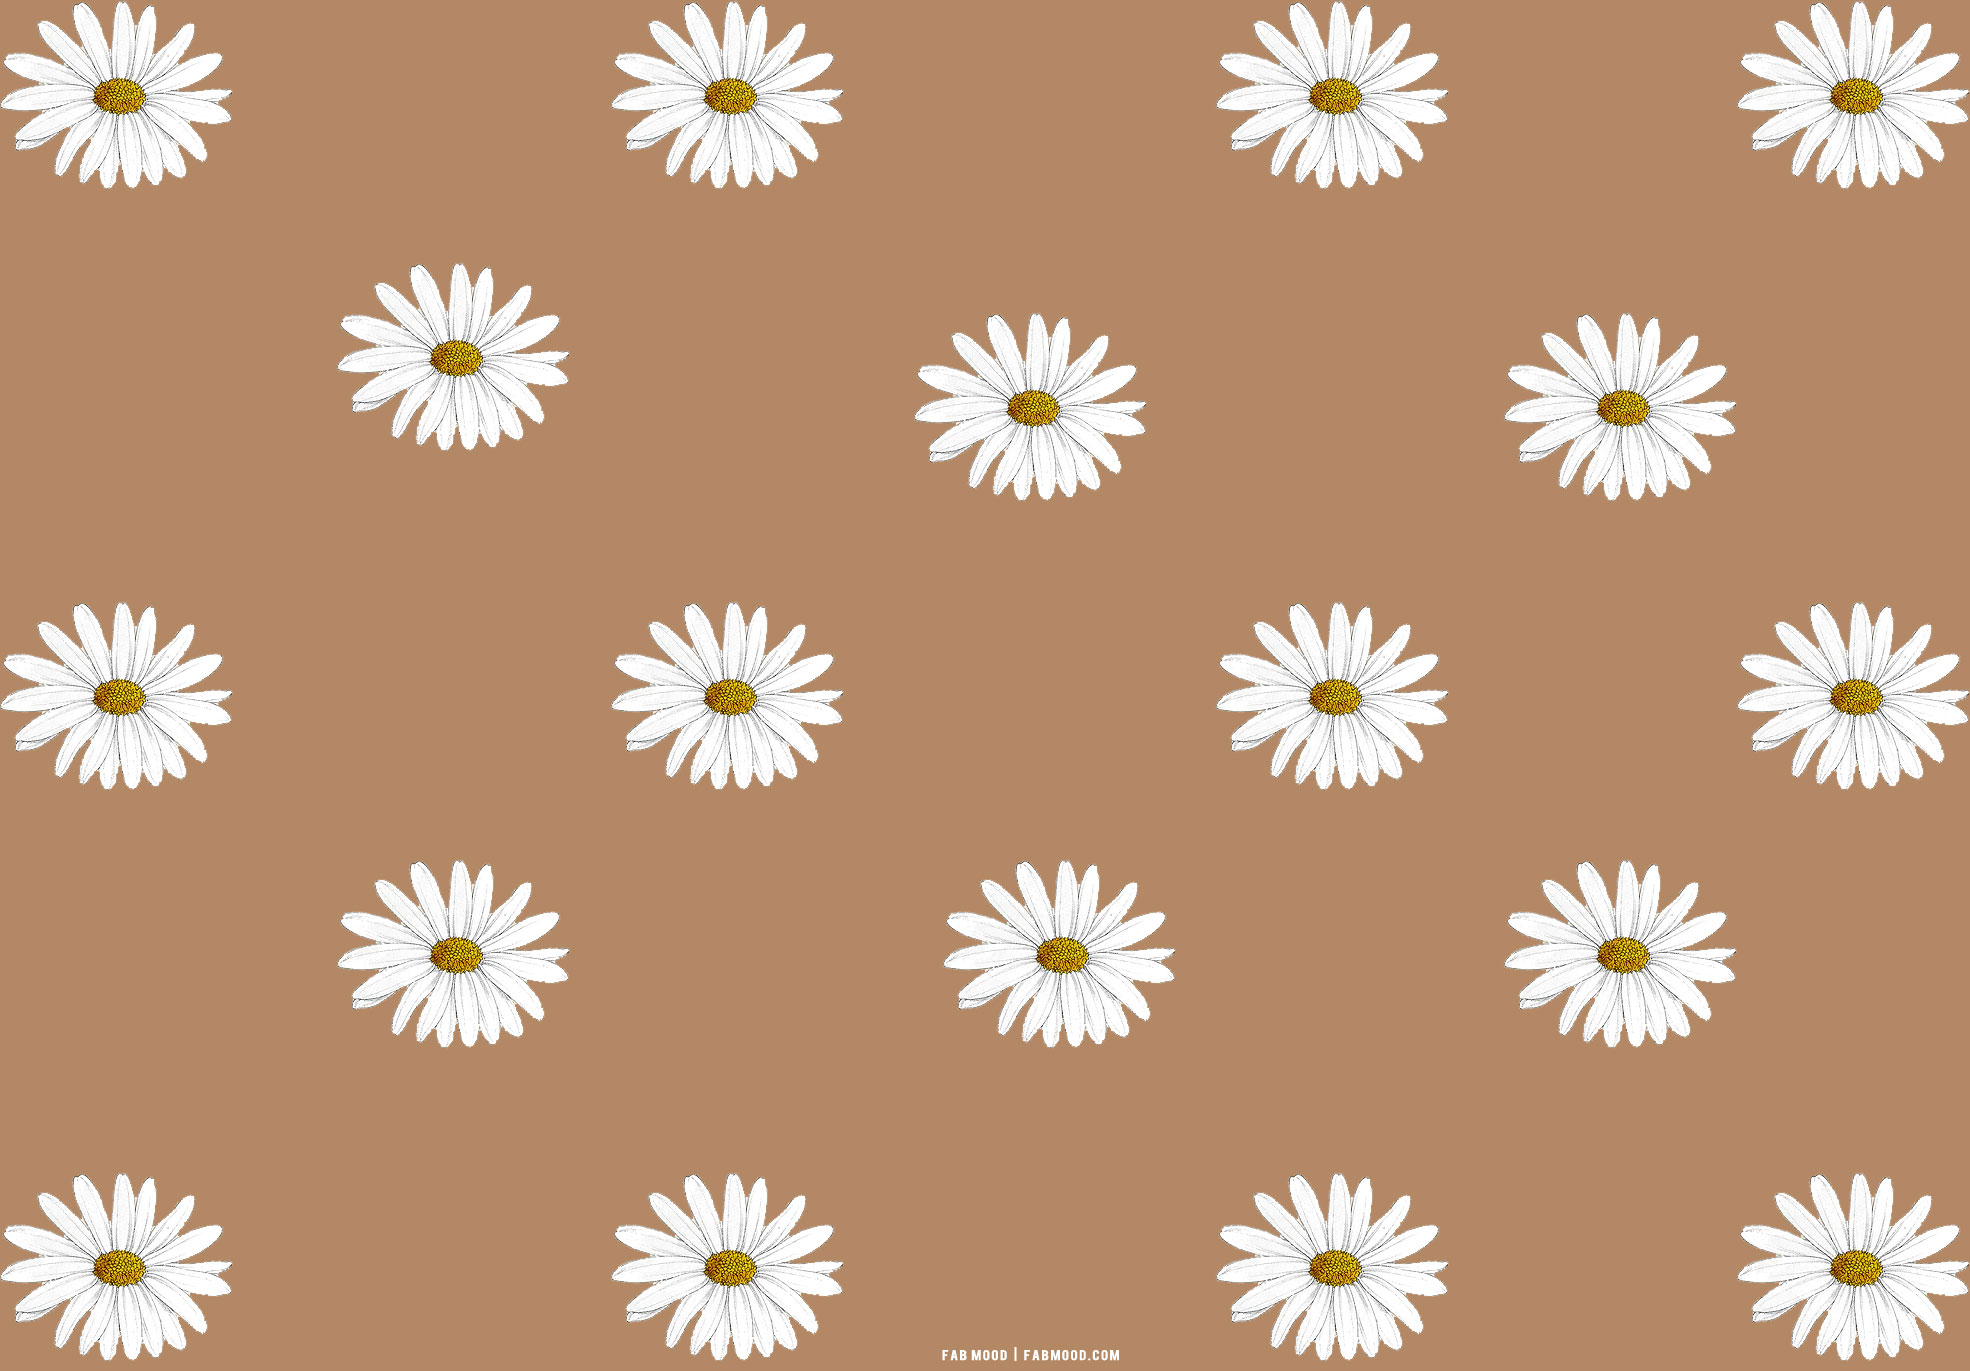 25 Brown Aesthetic Wallpaper for Laptop : Daisy Daisy